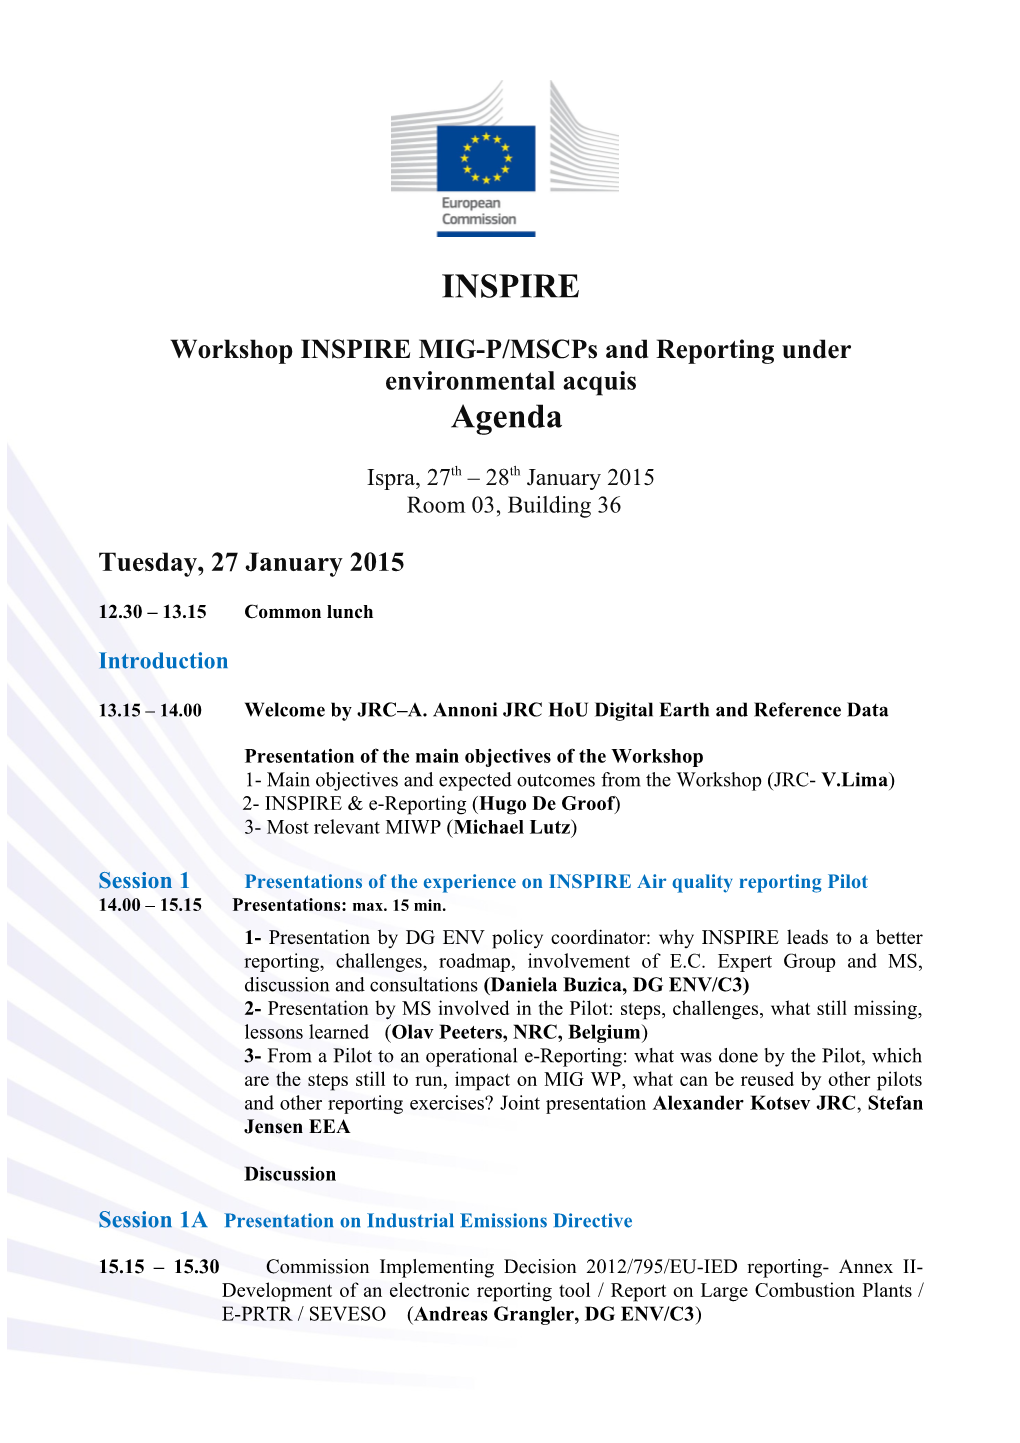 Workshop INSPIRE MIG-P/Mscps and Reporting Under Environmental Acquis